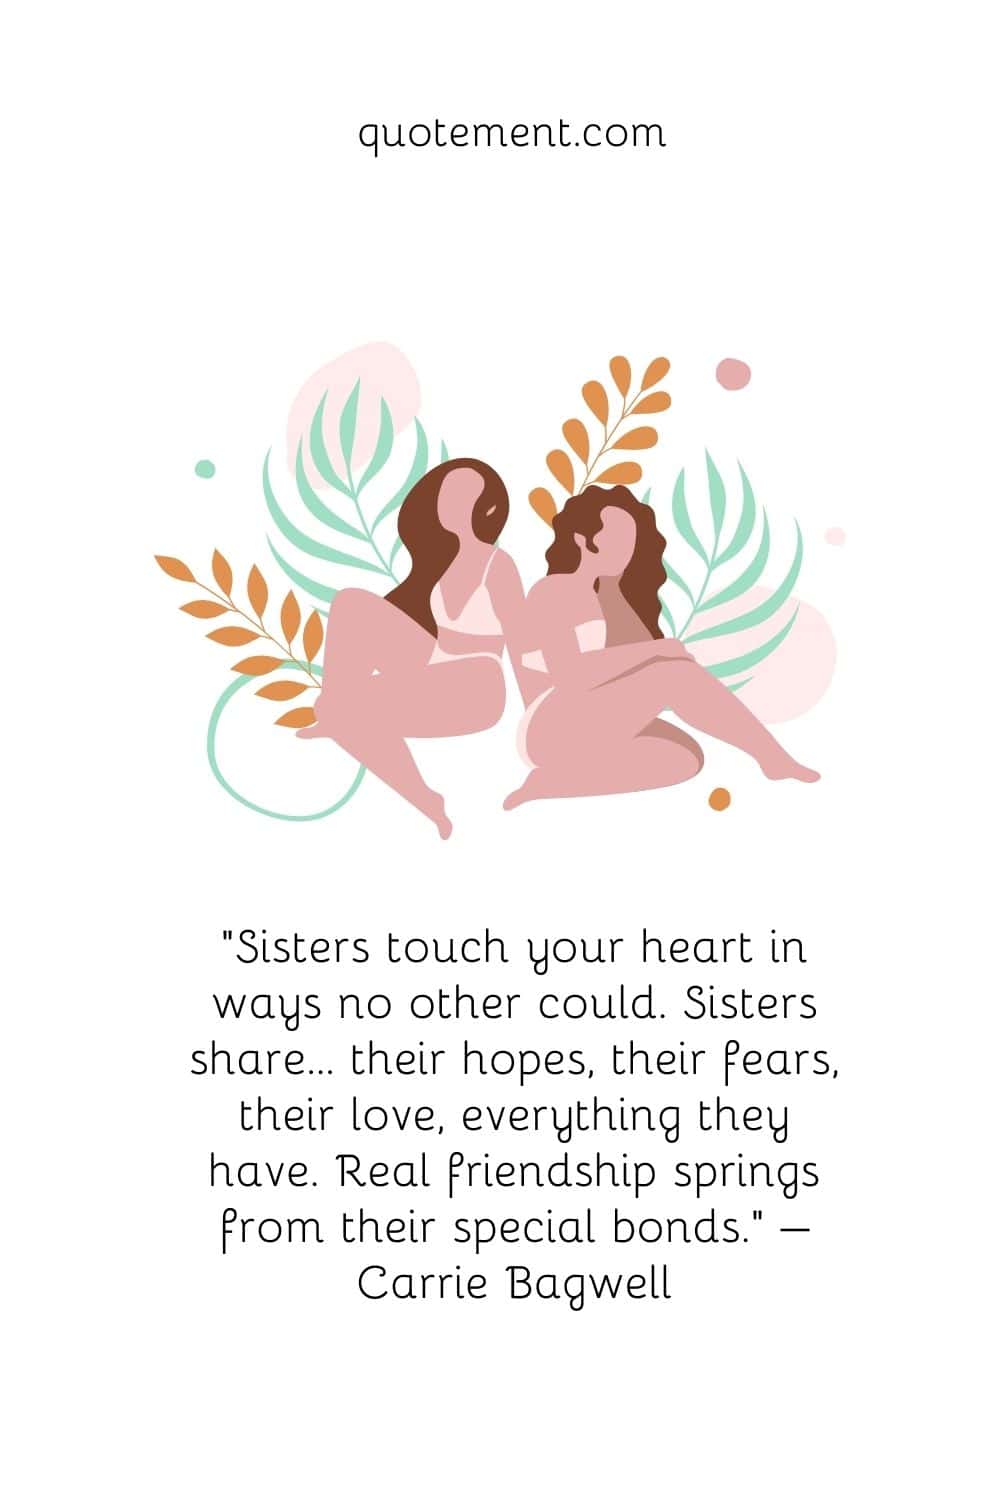 “Sisters touch your heart in ways no other could. Sisters share… their hopes, their fears, their love, everything they have.